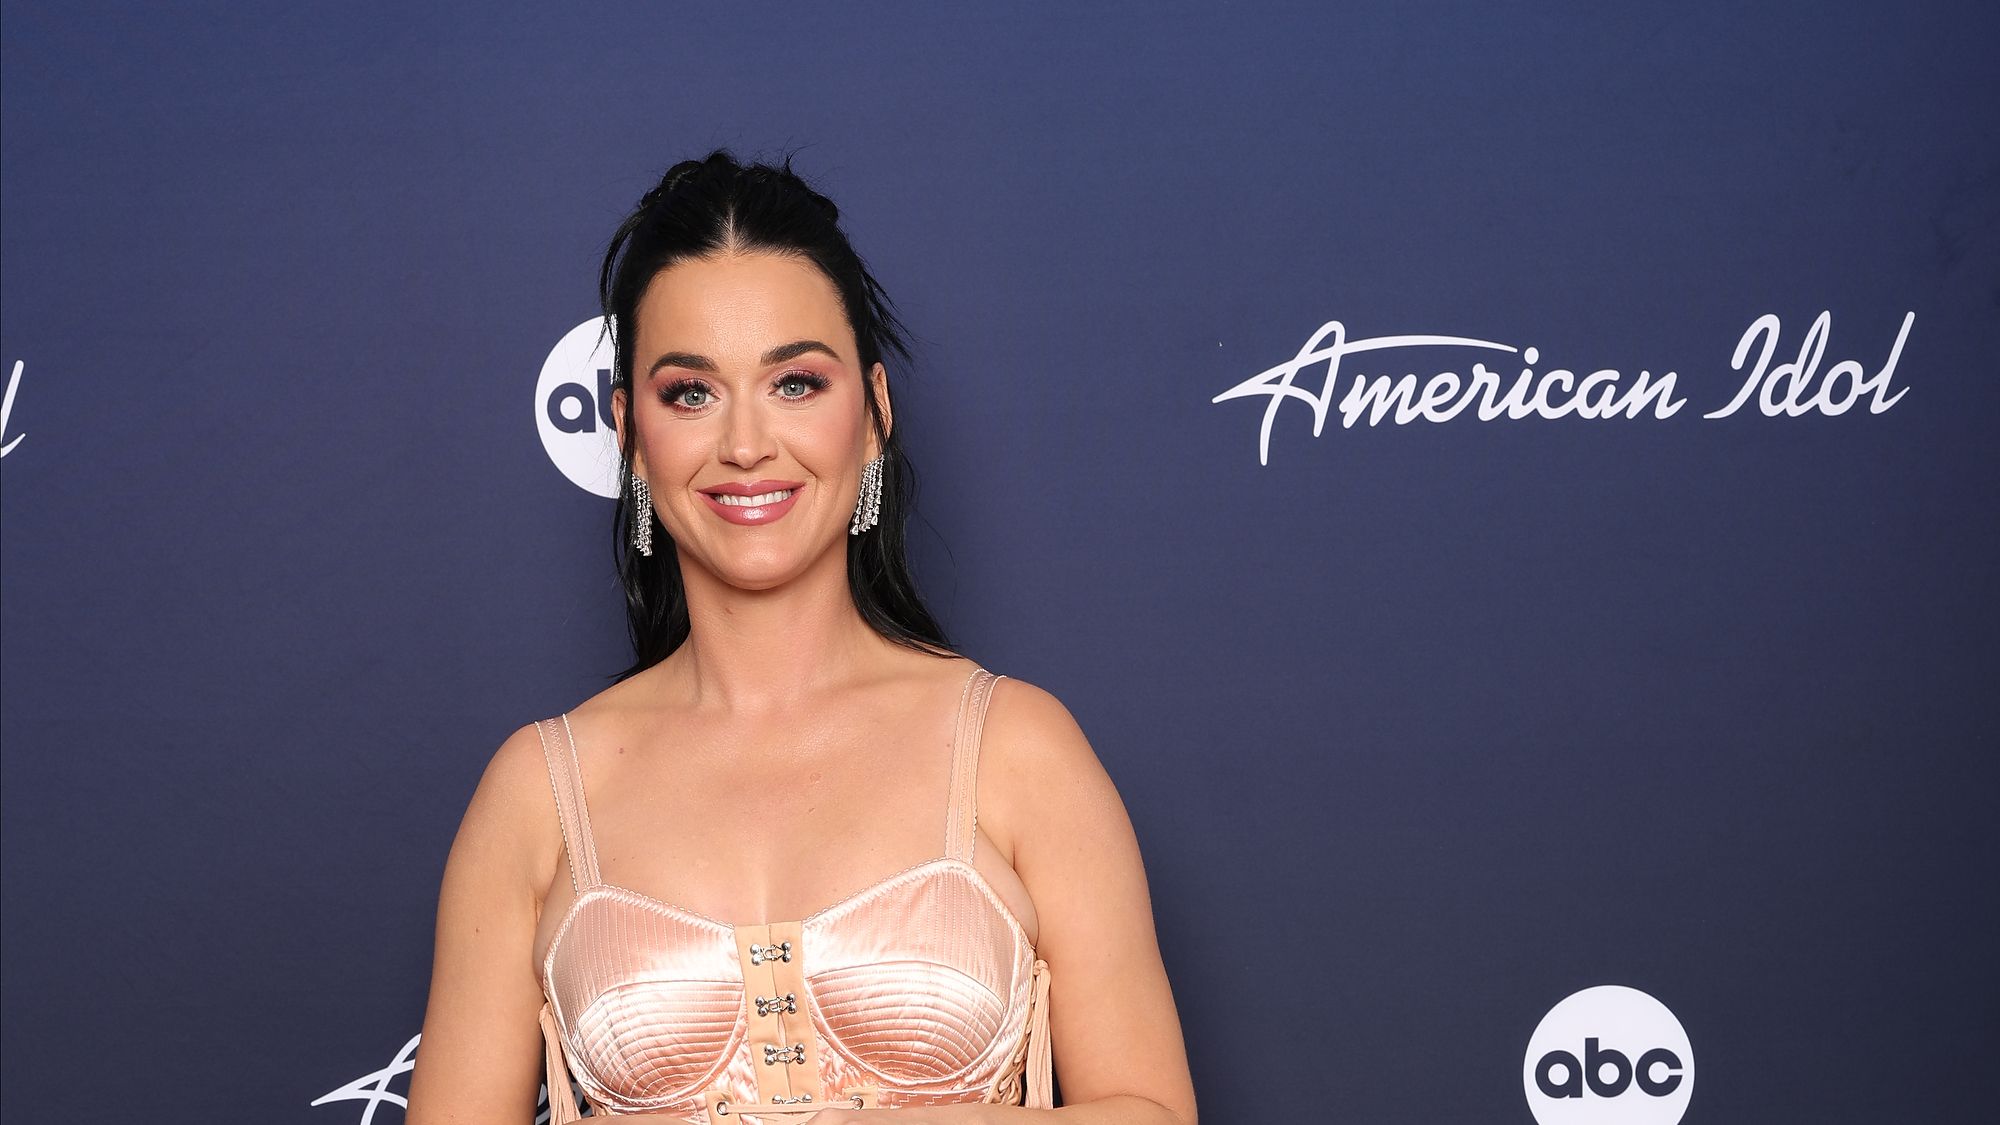 Katy Perry Dildo Porn - Katy Perry's Legs Look Seriously Toned In A Corset Dress